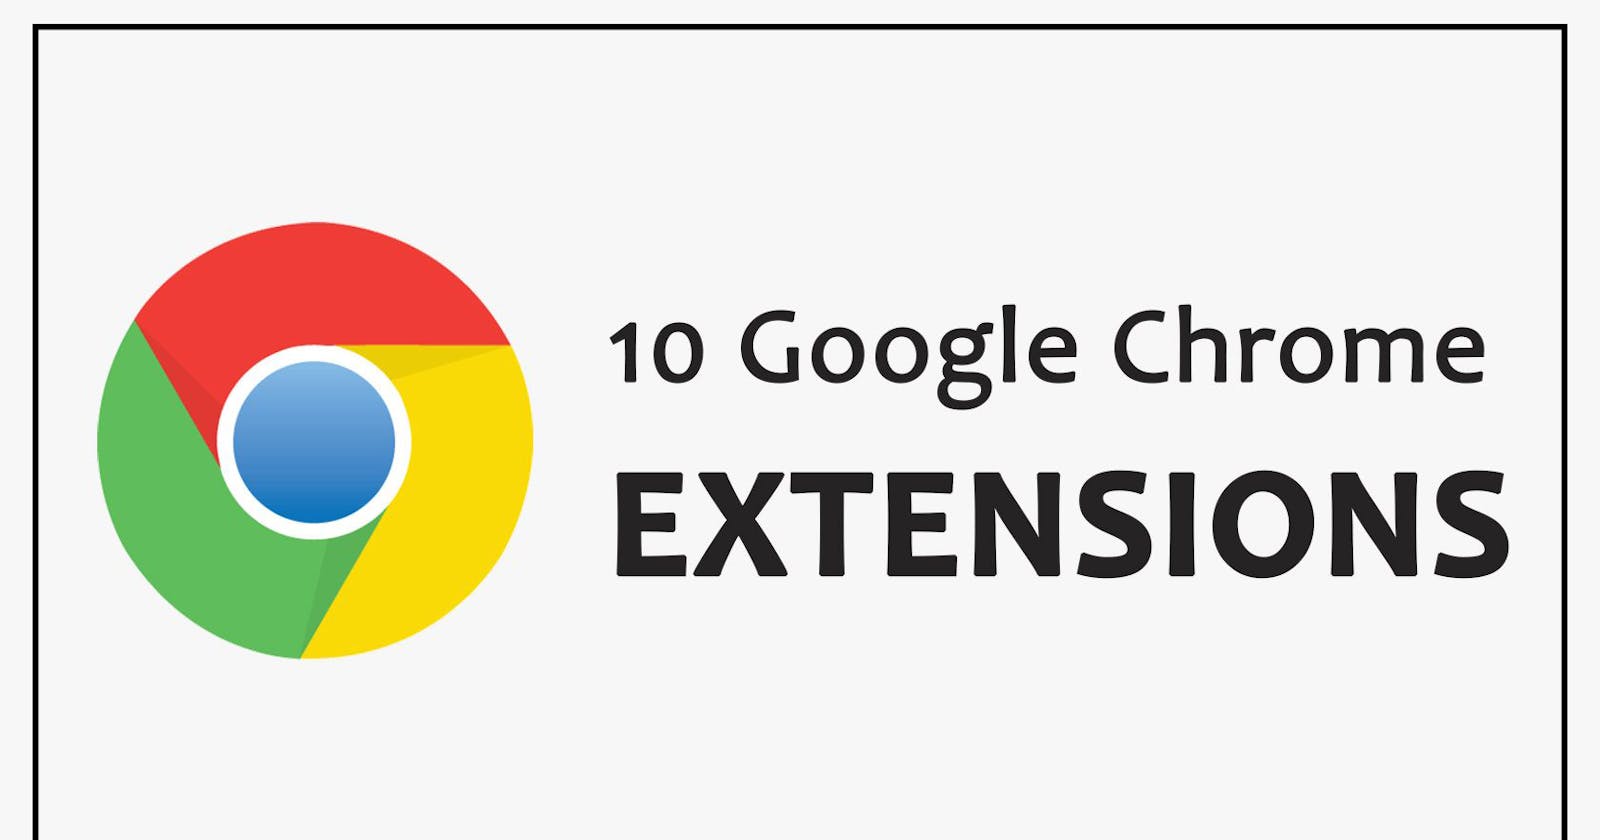 10 Google Chrome Extensions you should use as a developer